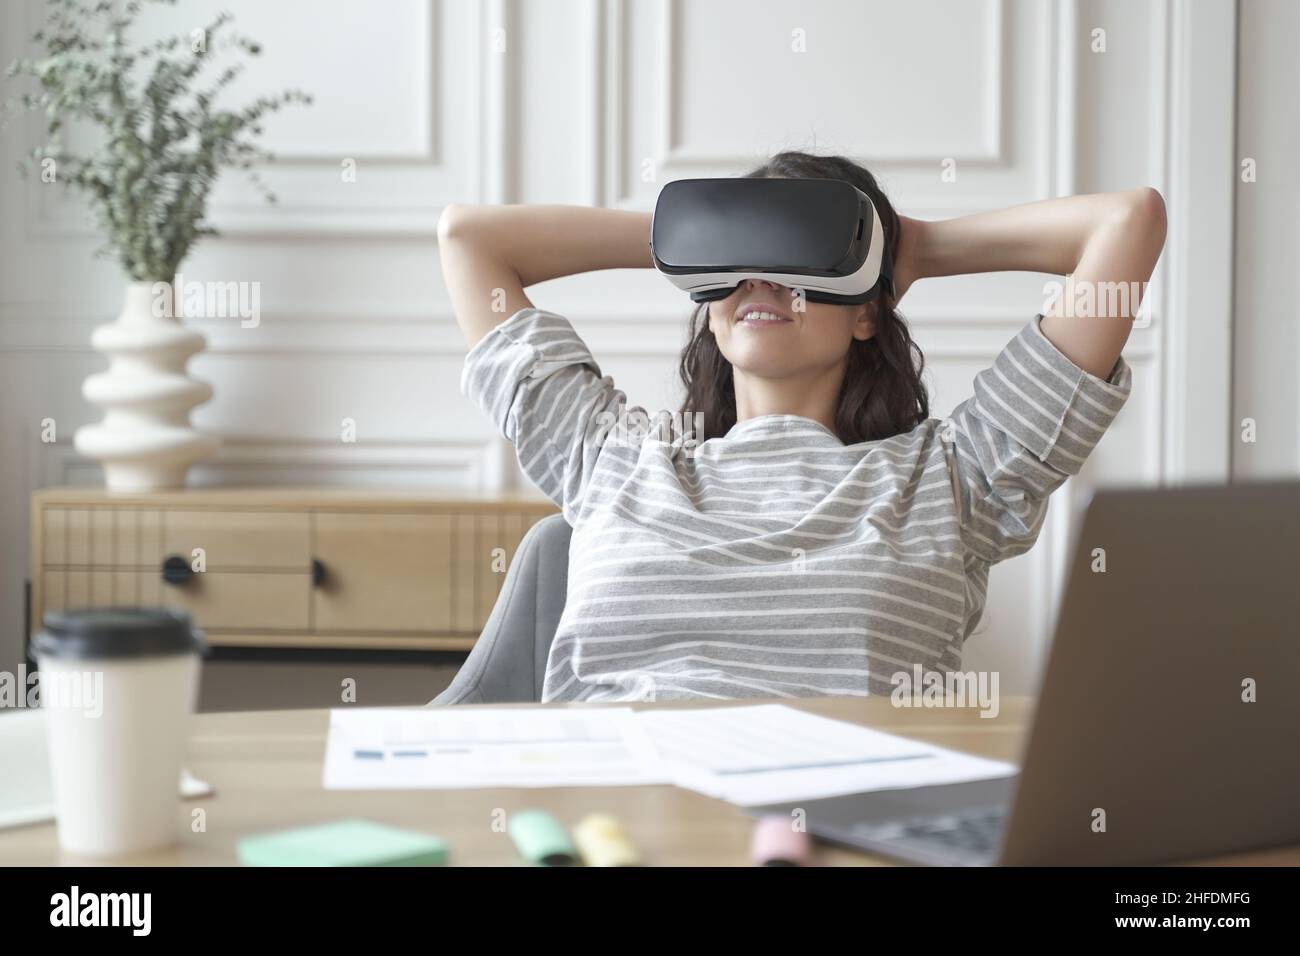 Relaxed young woman office worker in VR headset or helmet watching in 360 degrees video or movie Stock Photo